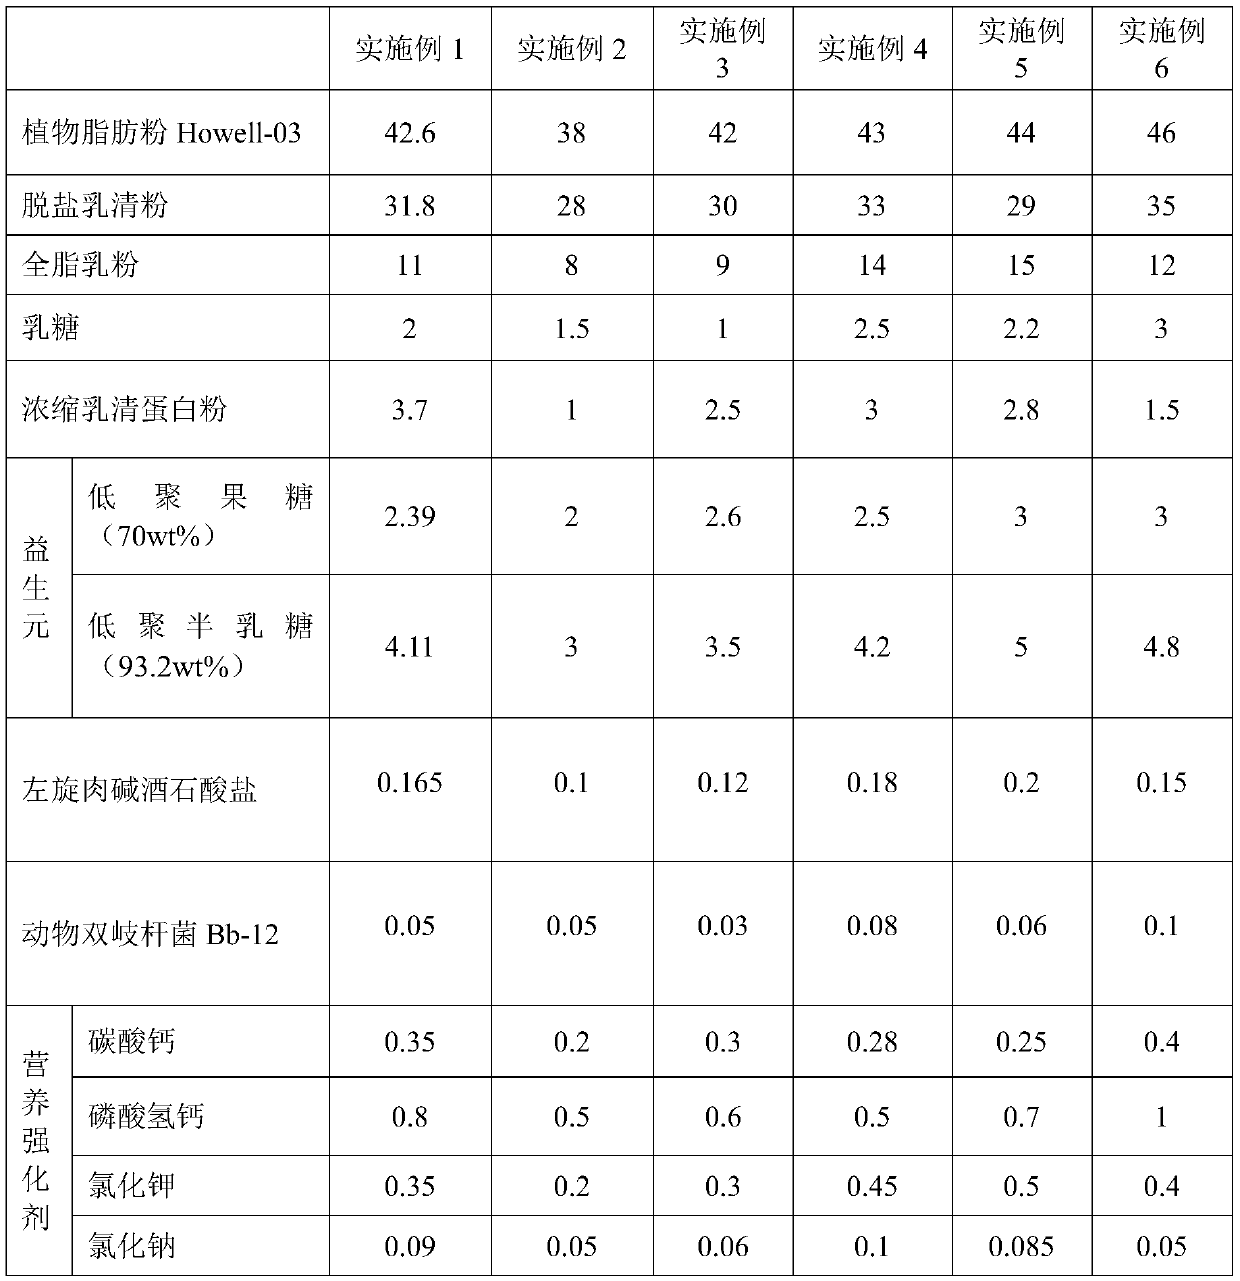 Infant dried milk for simulating intestine microecology of breast feeding children